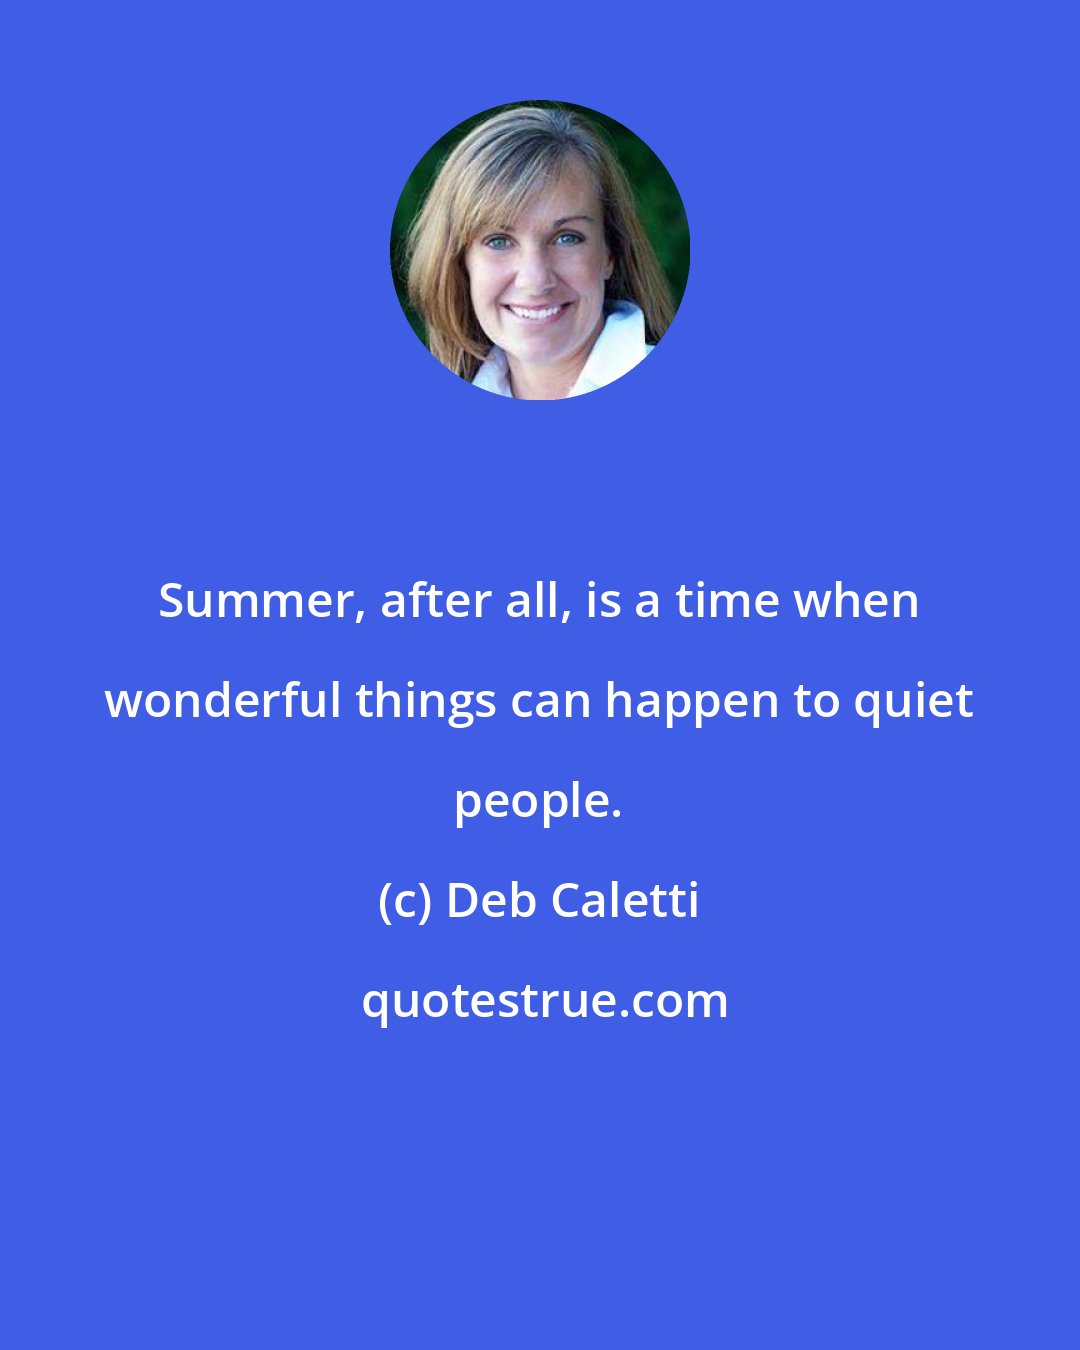 Deb Caletti: Summer, after all, is a time when wonderful things can happen to quiet people.